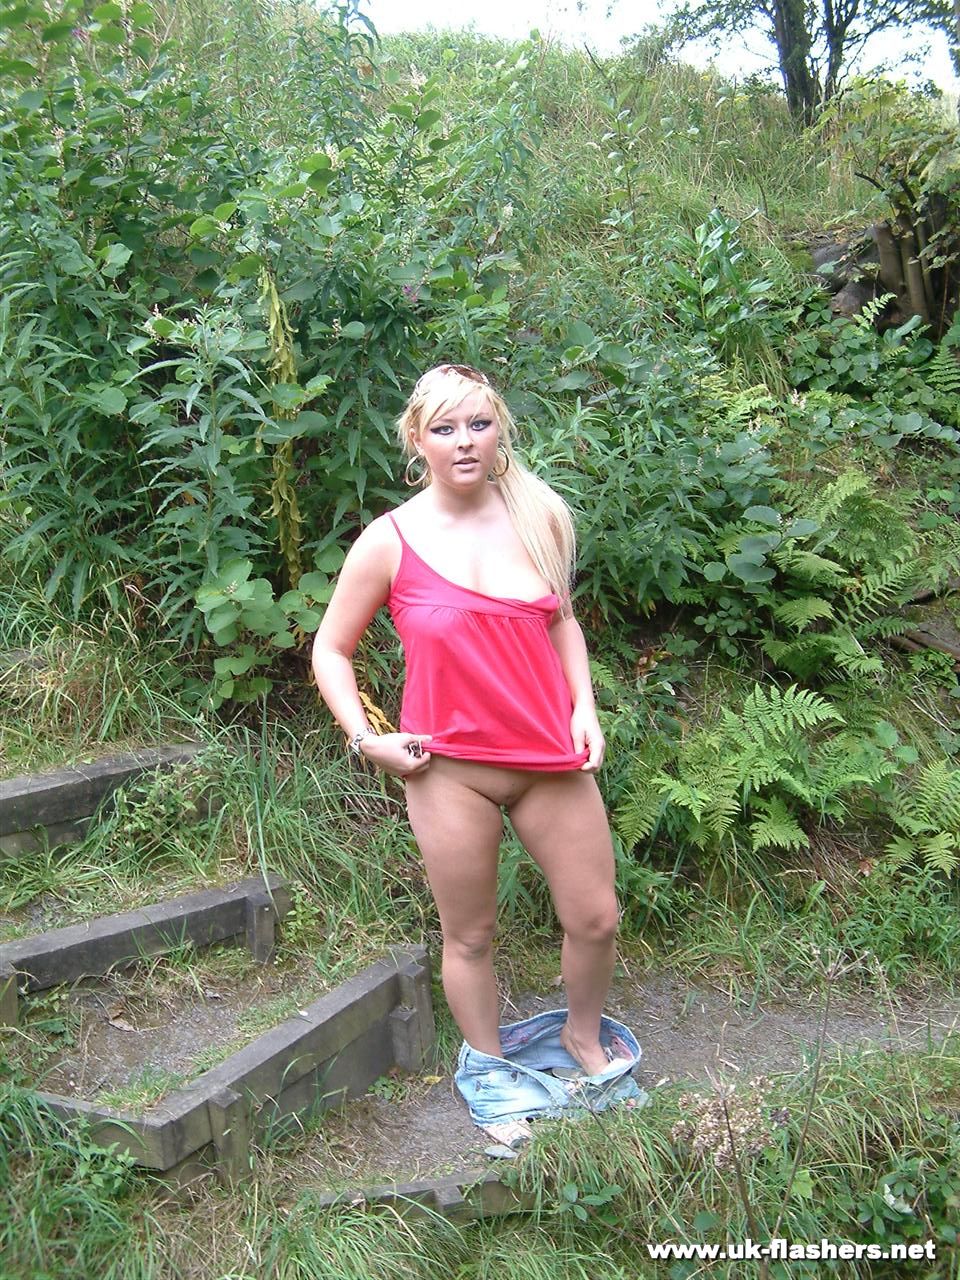 Overweight UK female with blonde hair strips naked on a popular walking trails 포르노 사진 #428197332